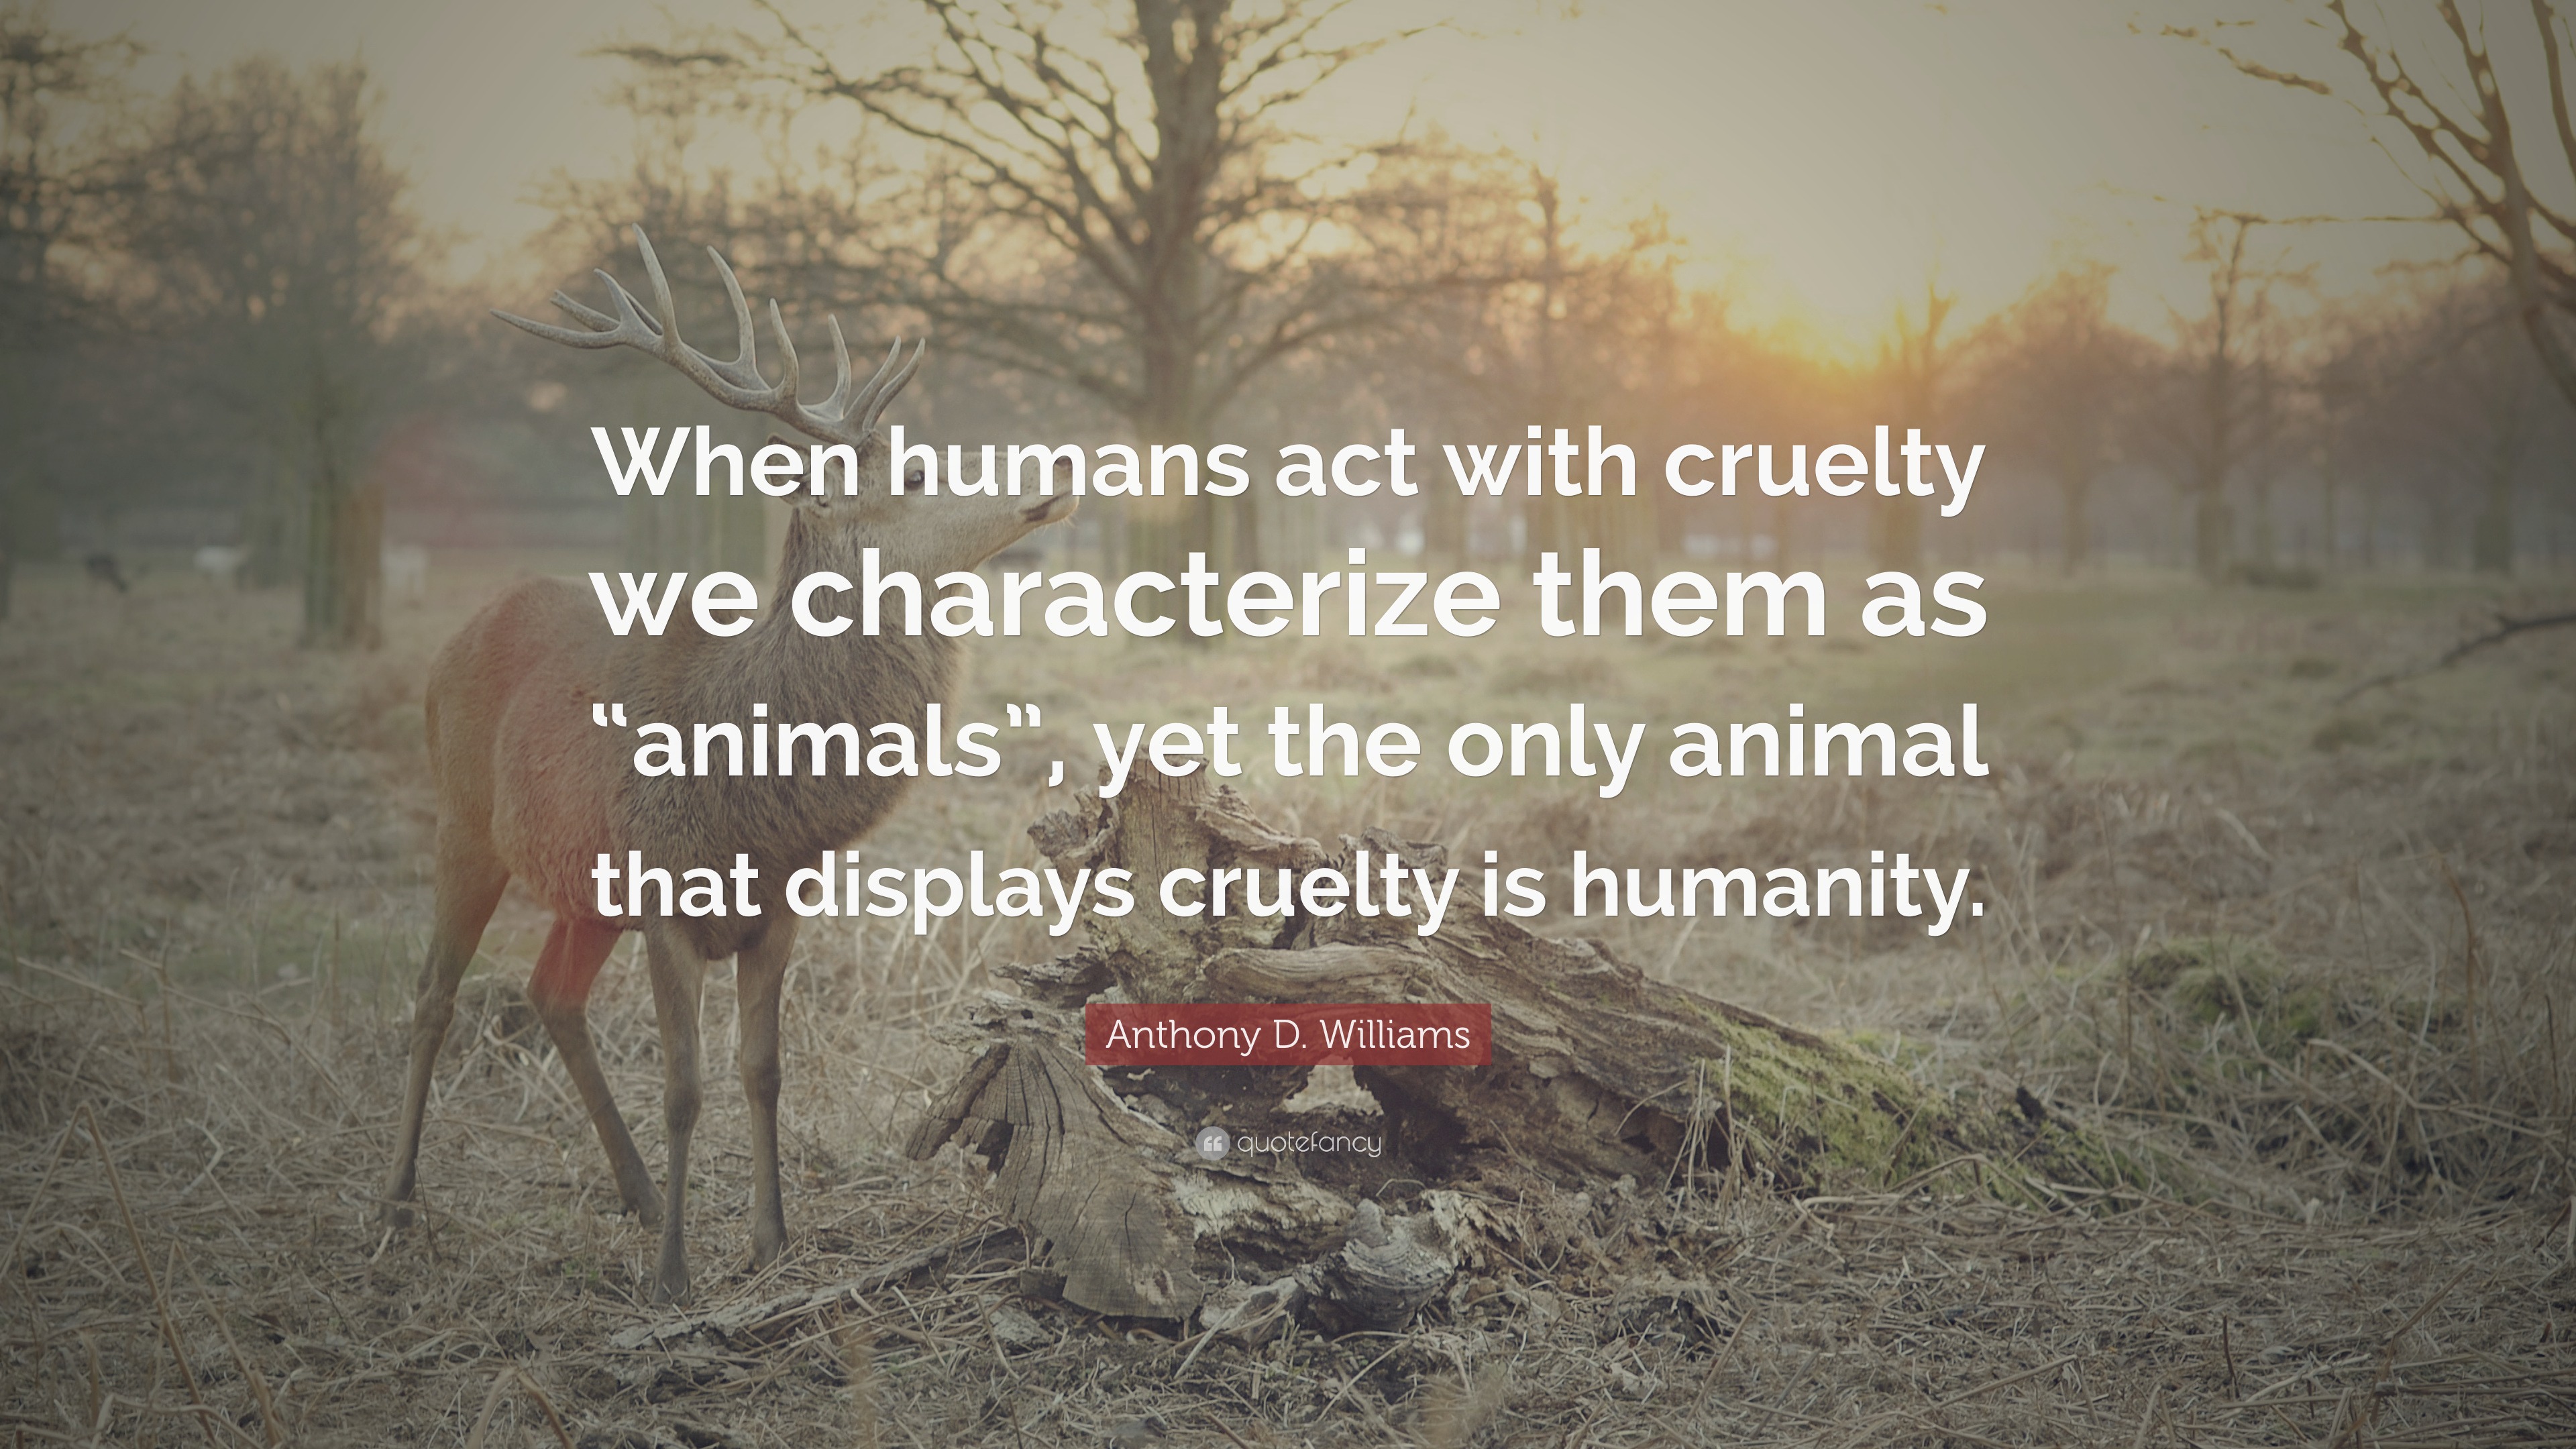 Anthony D. Williams Quote: “When humans act with cruelty we characterize  them as “animals”, yet the